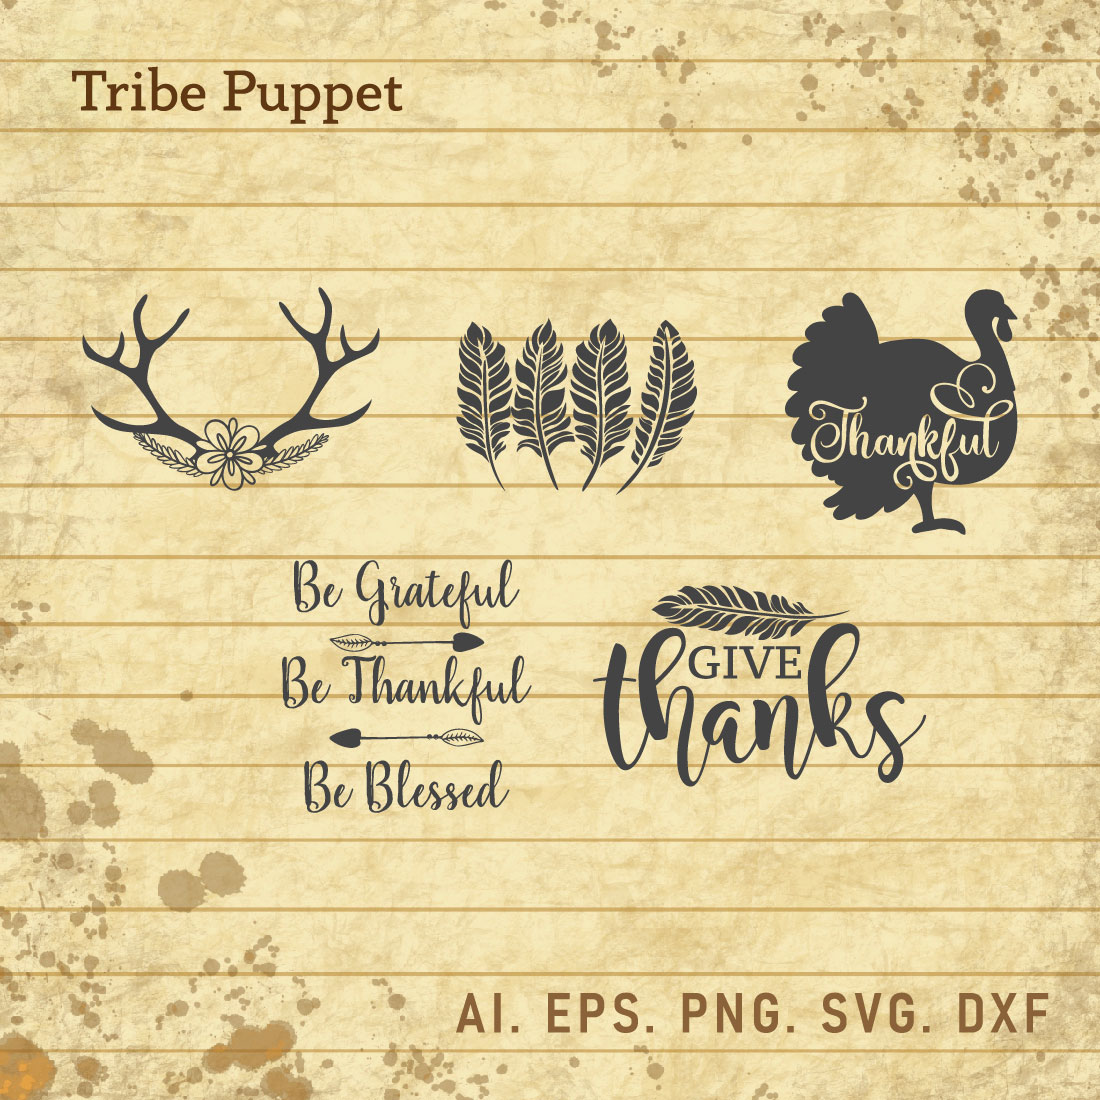 Thankxgiving Quotes 08 cover image.